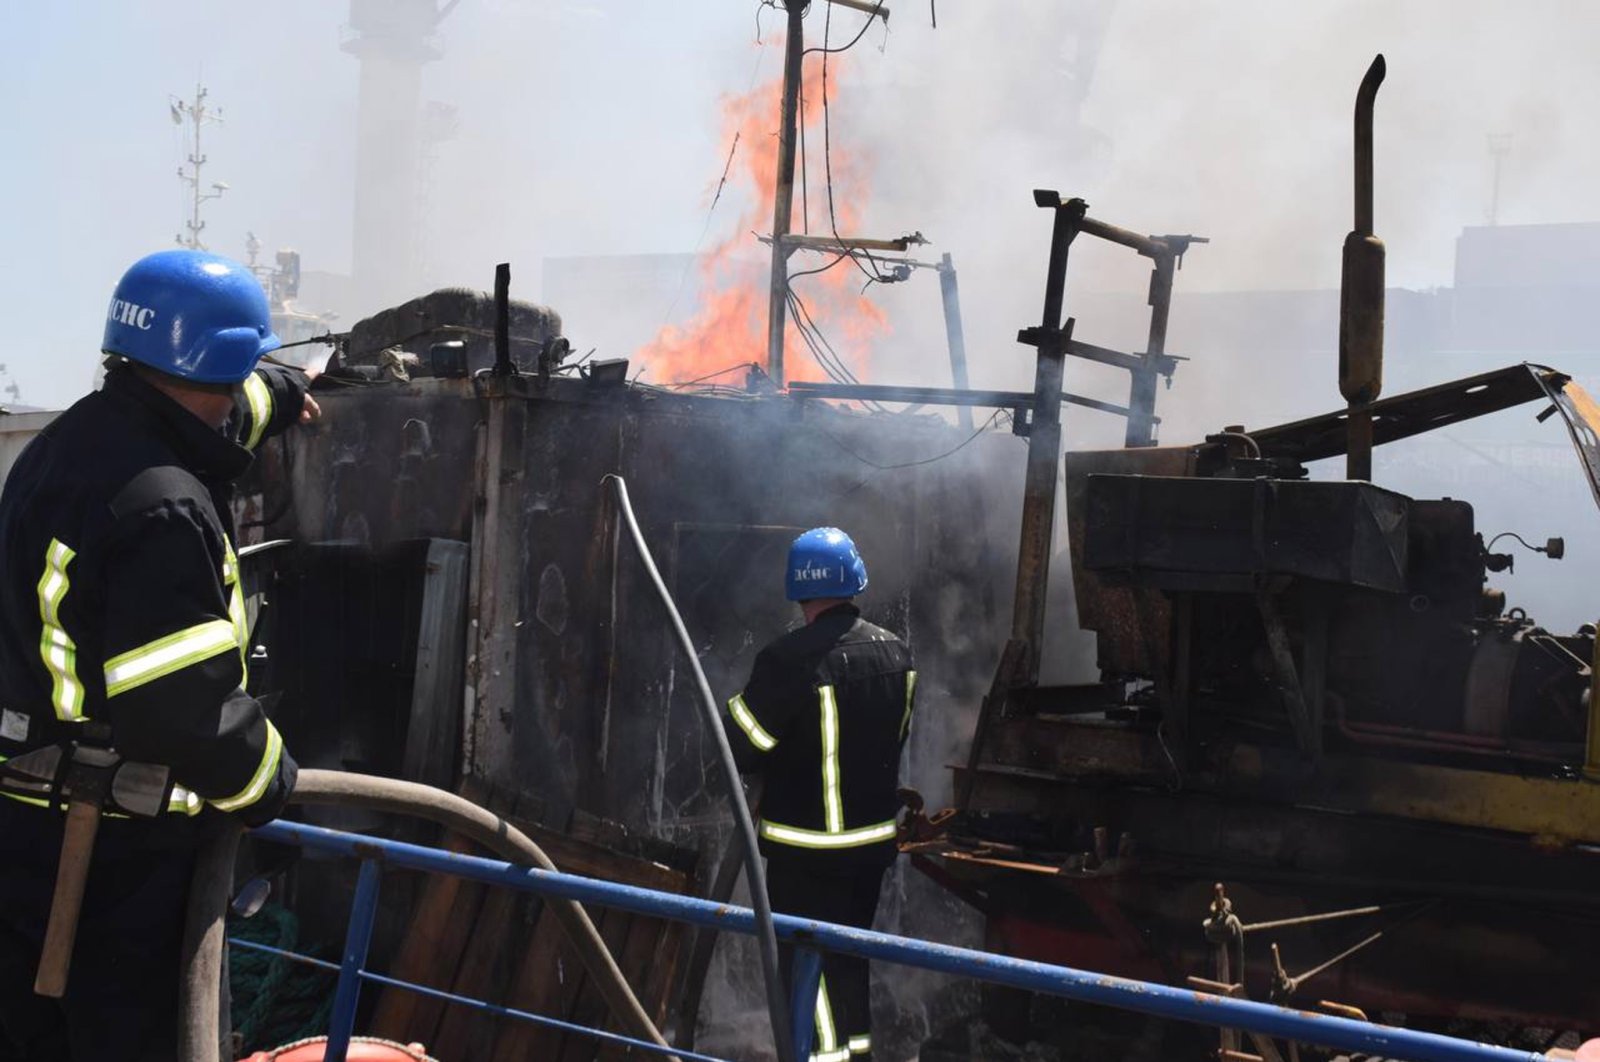 Firefighters work to put out a fire in a sea port in Odessa, southern Ukraine in this handout photo released by Odessa City Hall Press Office on July 23, 2022. (EPA Photo)